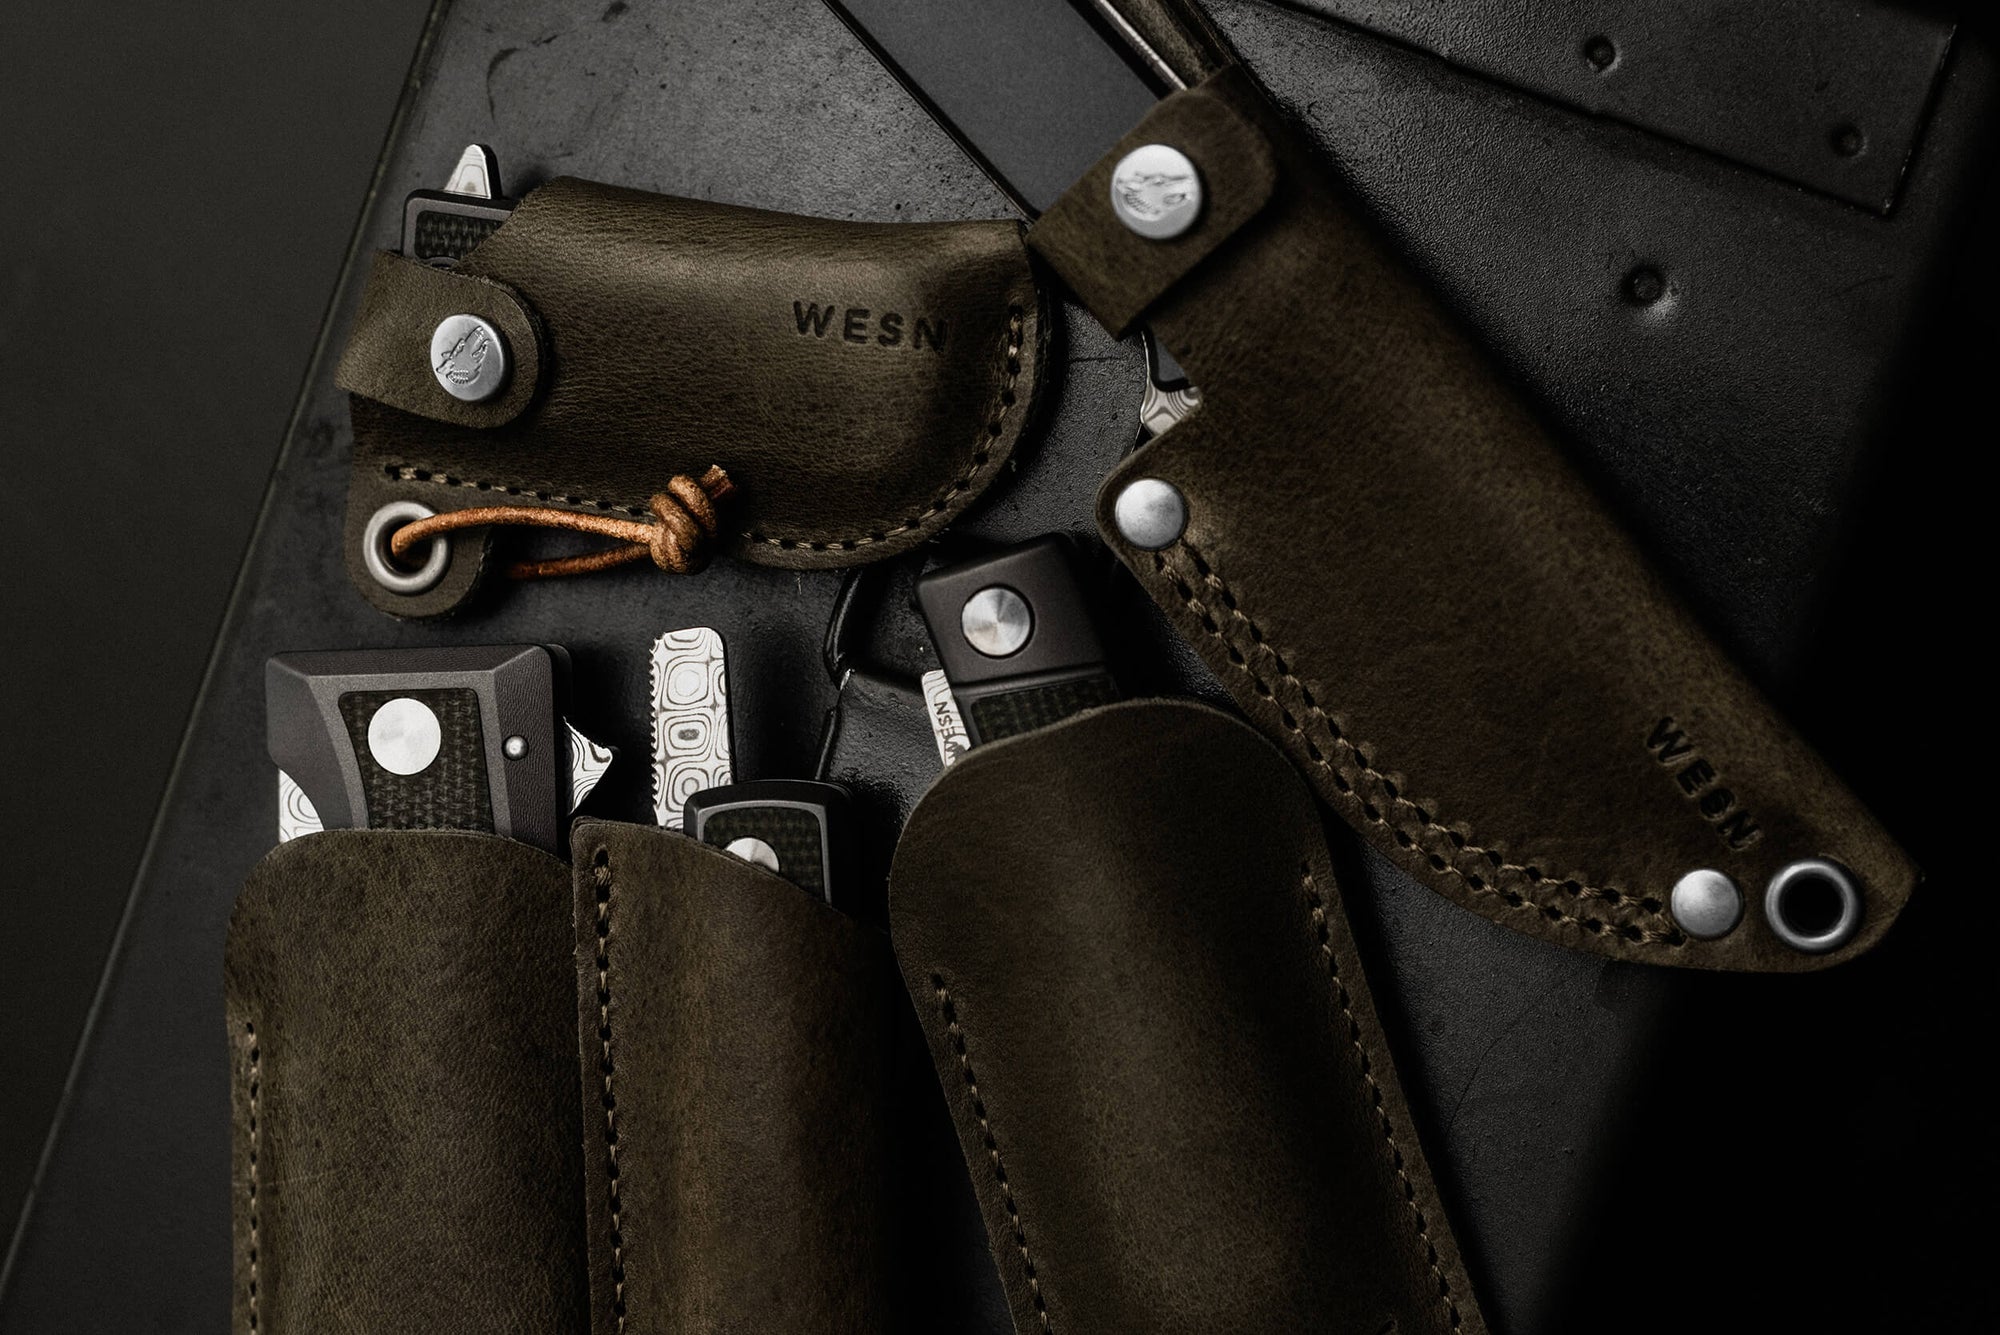 The WESN Founders Line Knives